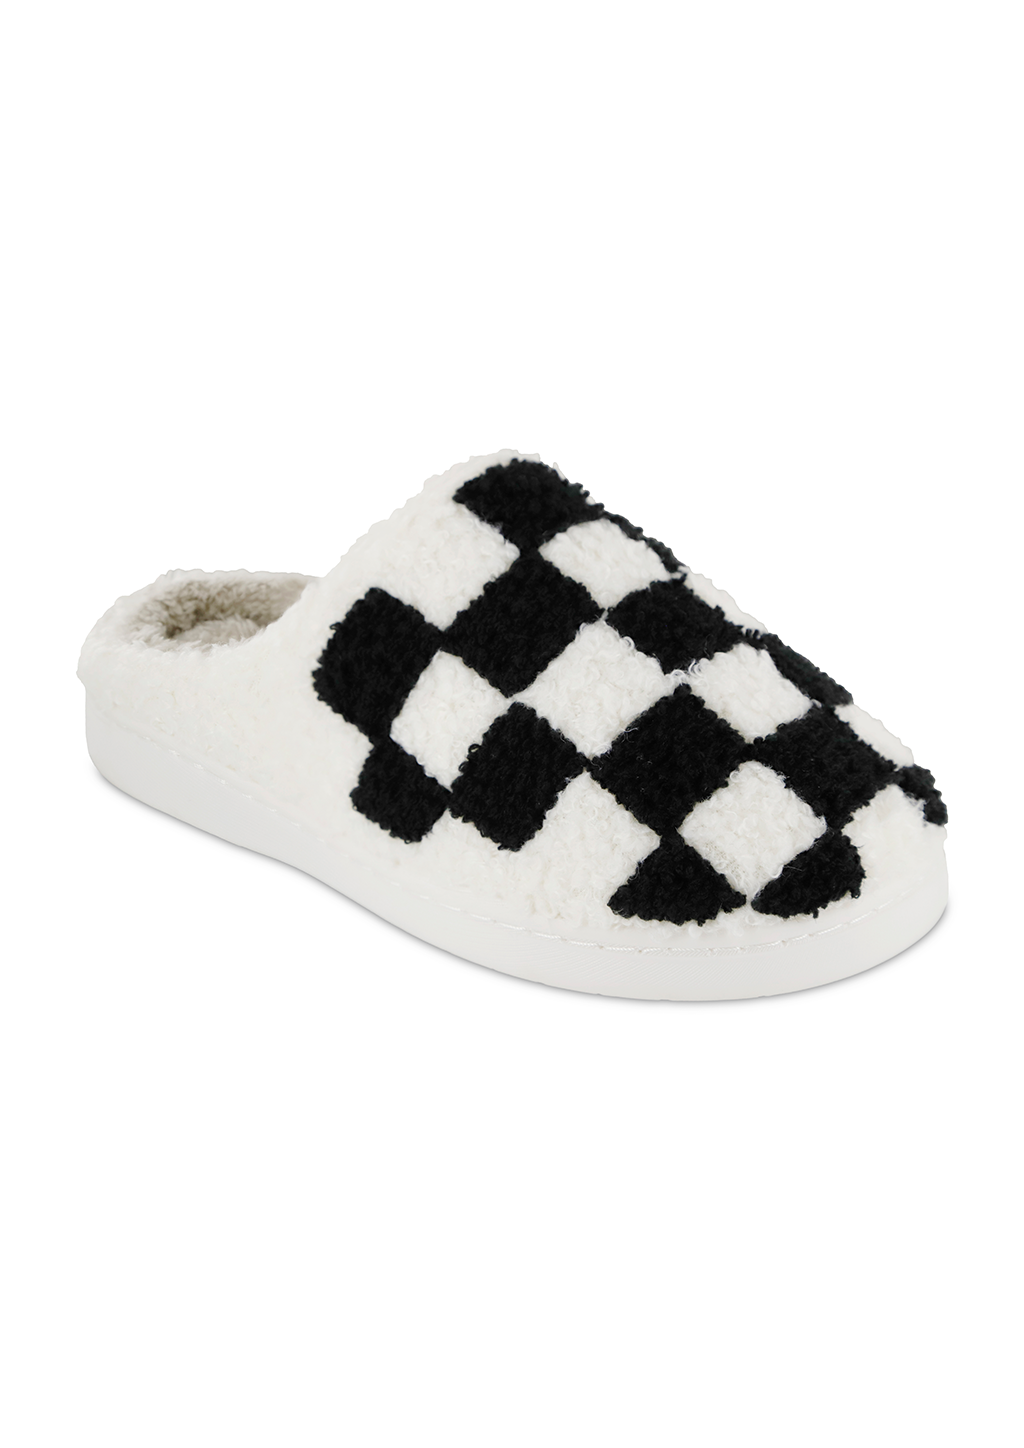 Black & White Checkered Slippers-220 Shoes-MIA-Peachy Keen Boutique, Women's Fashion Boutique, Located in Cape Girardeau and Dexter, MO